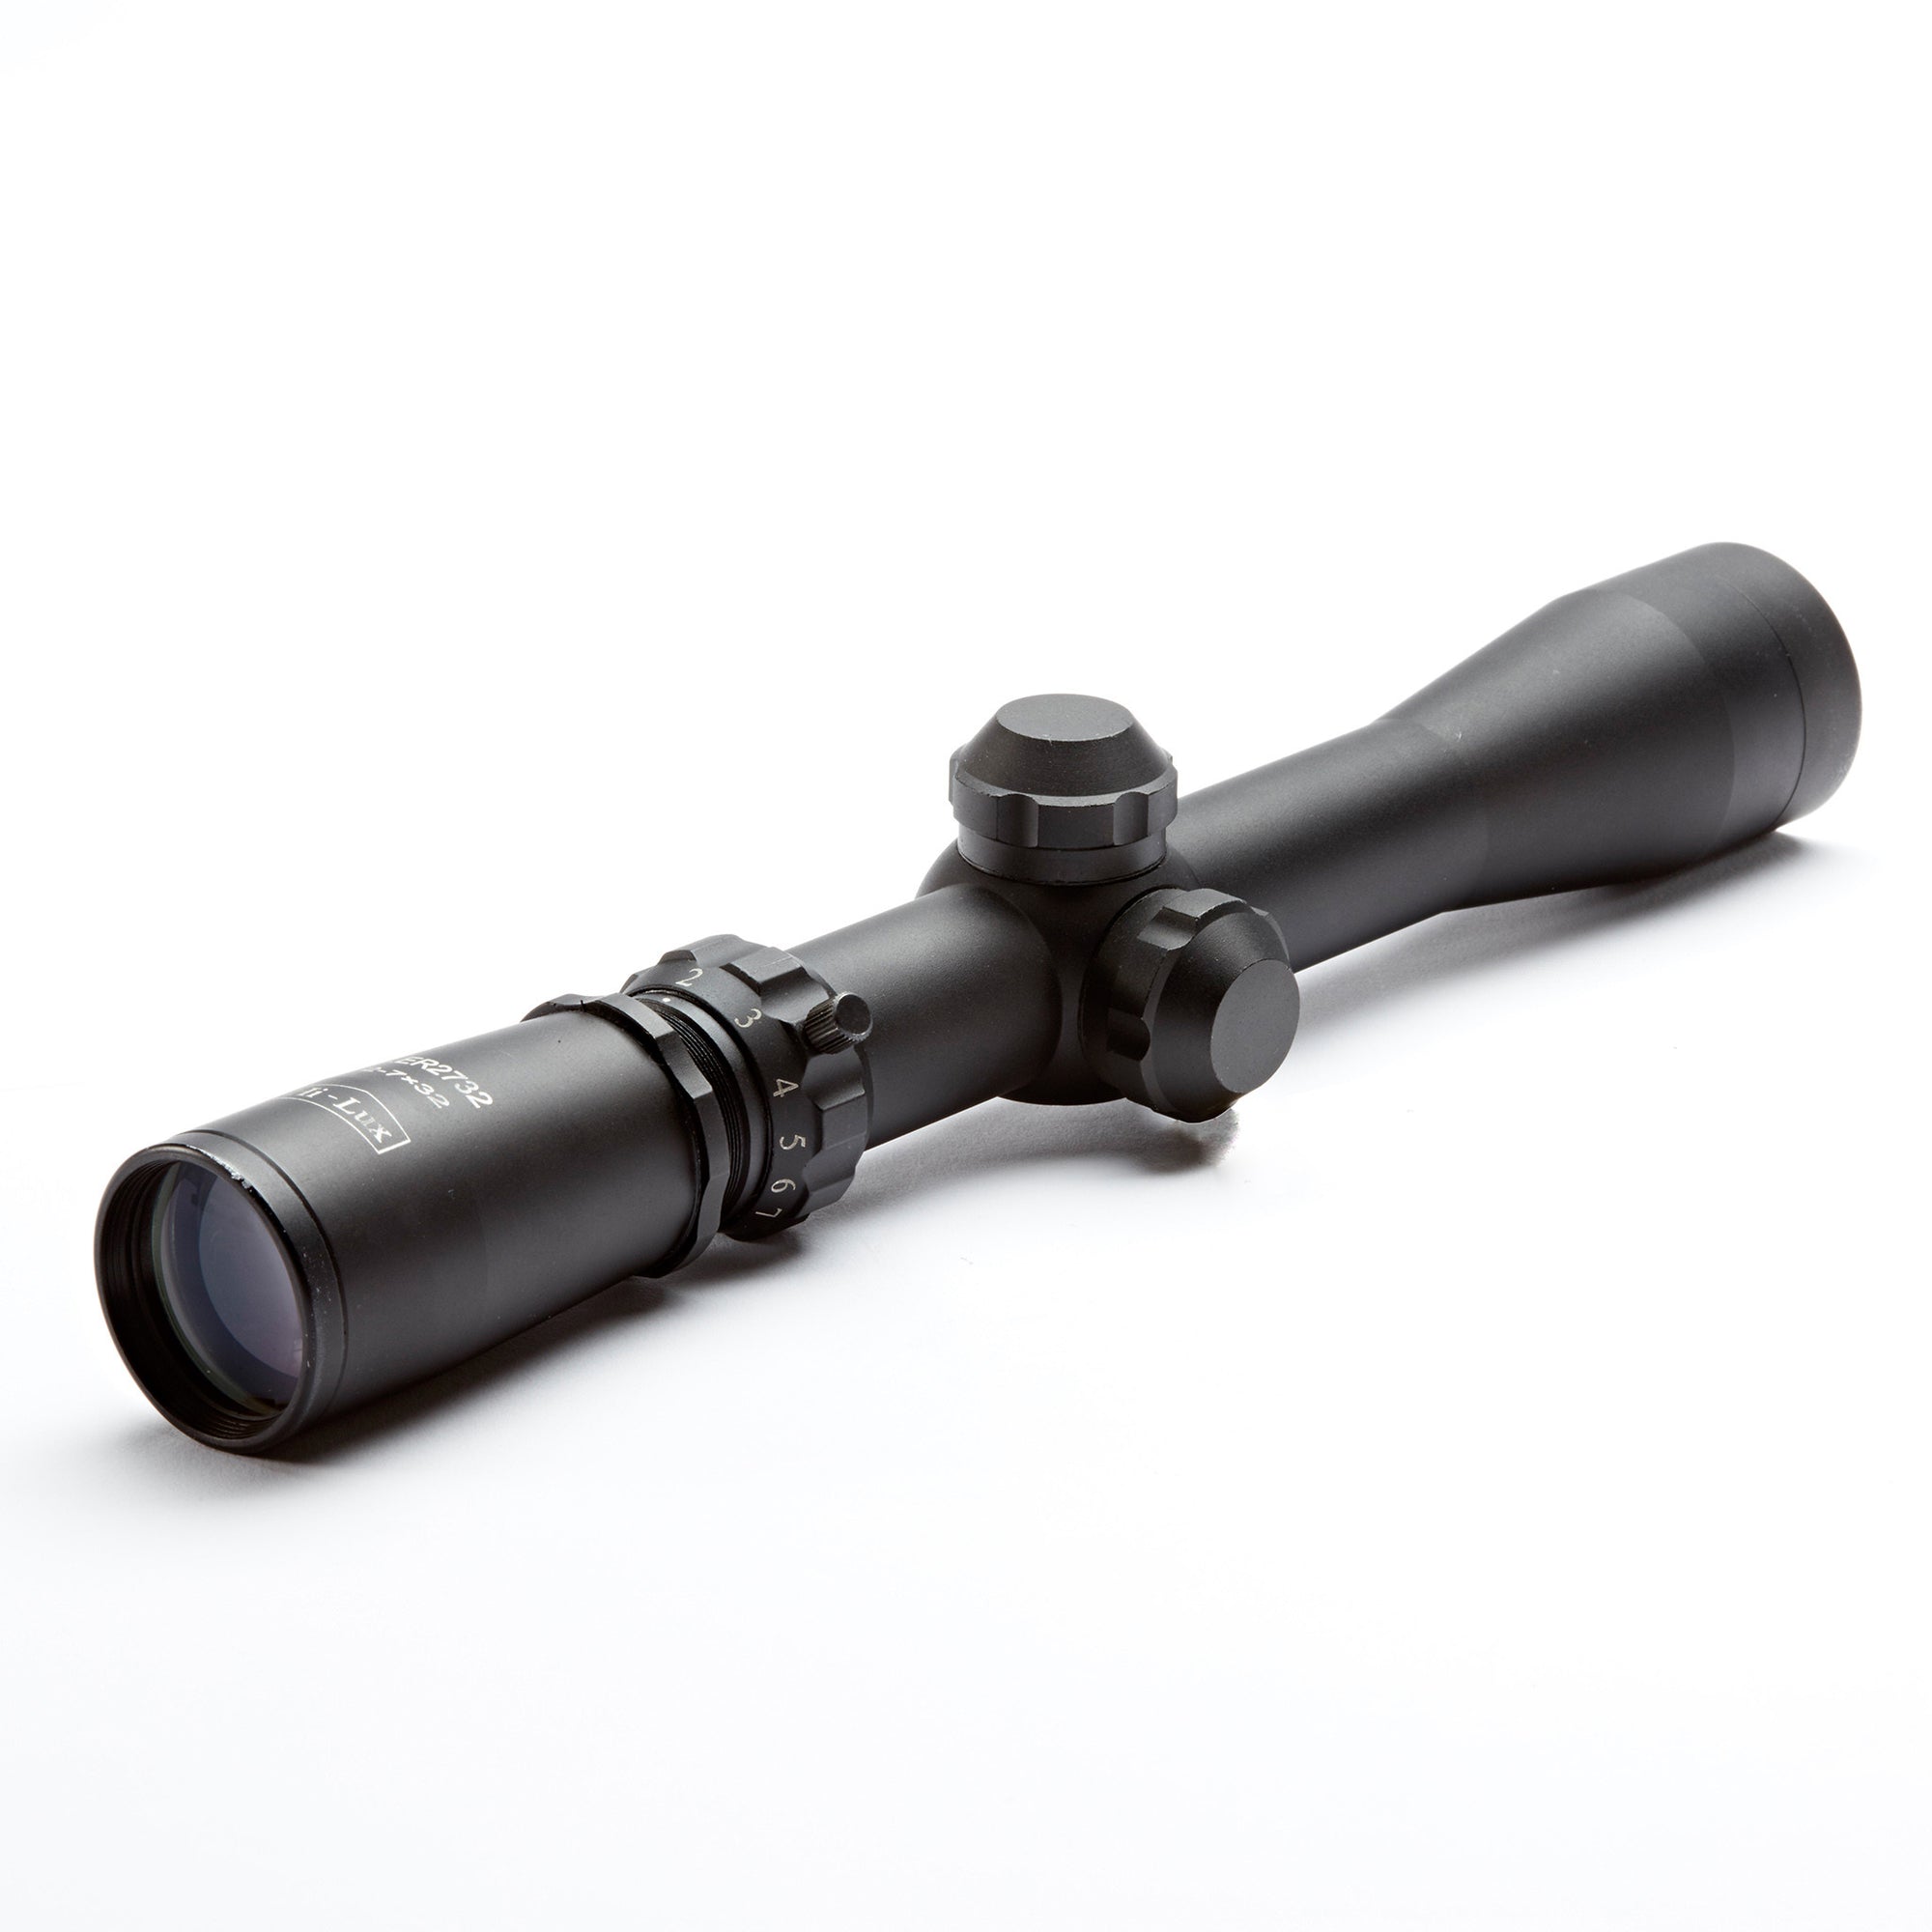 The Hi-Lux Optics LER Scout Scope - Specifically Designed for Today's Scout Rifles